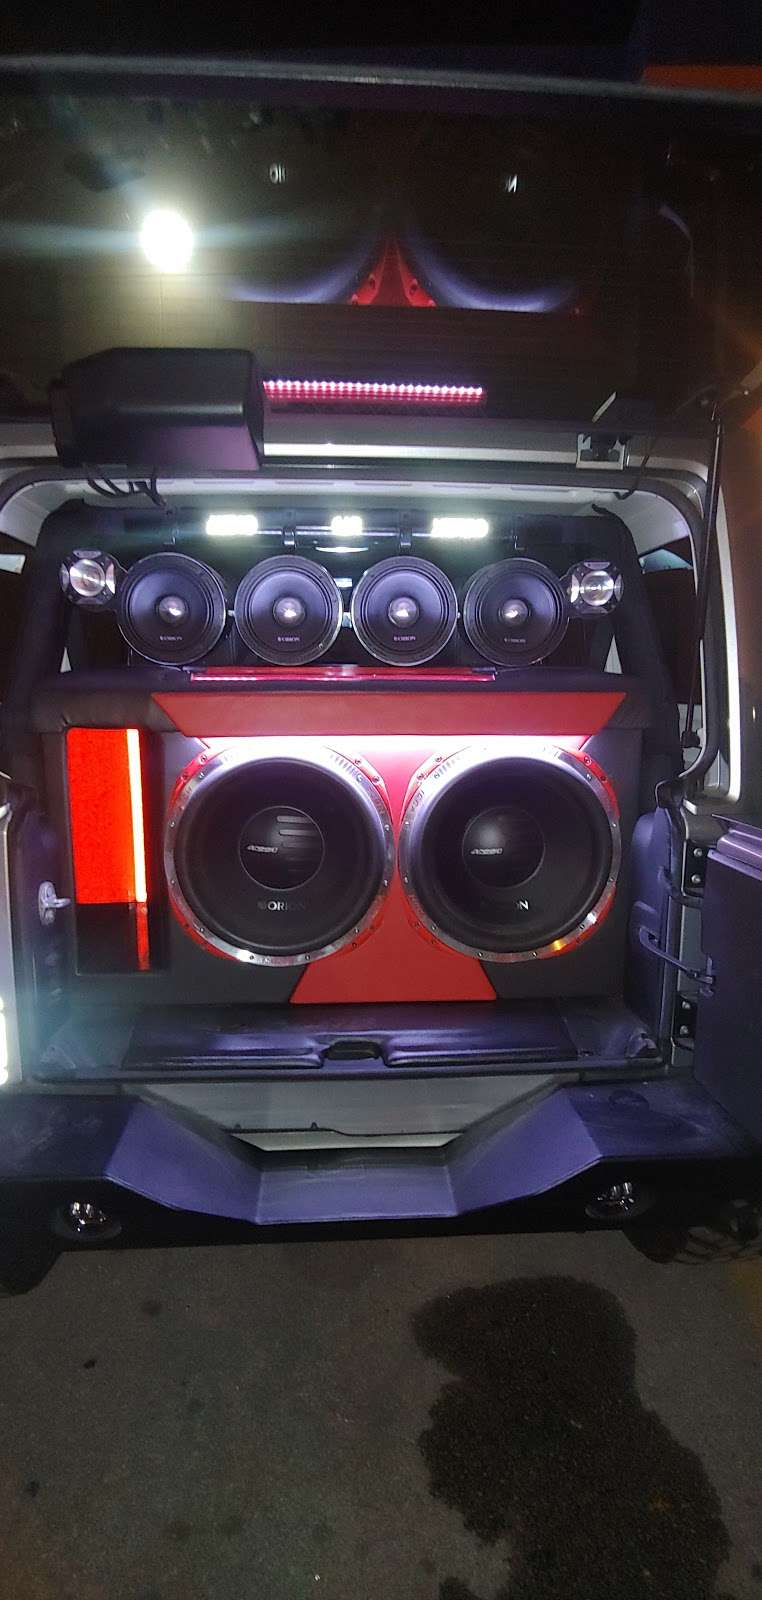 AUDIO CAR STEREO | 4857 NW 72nd Ave, Miami, FL 33166, USA | Phone: (305) 340-1675